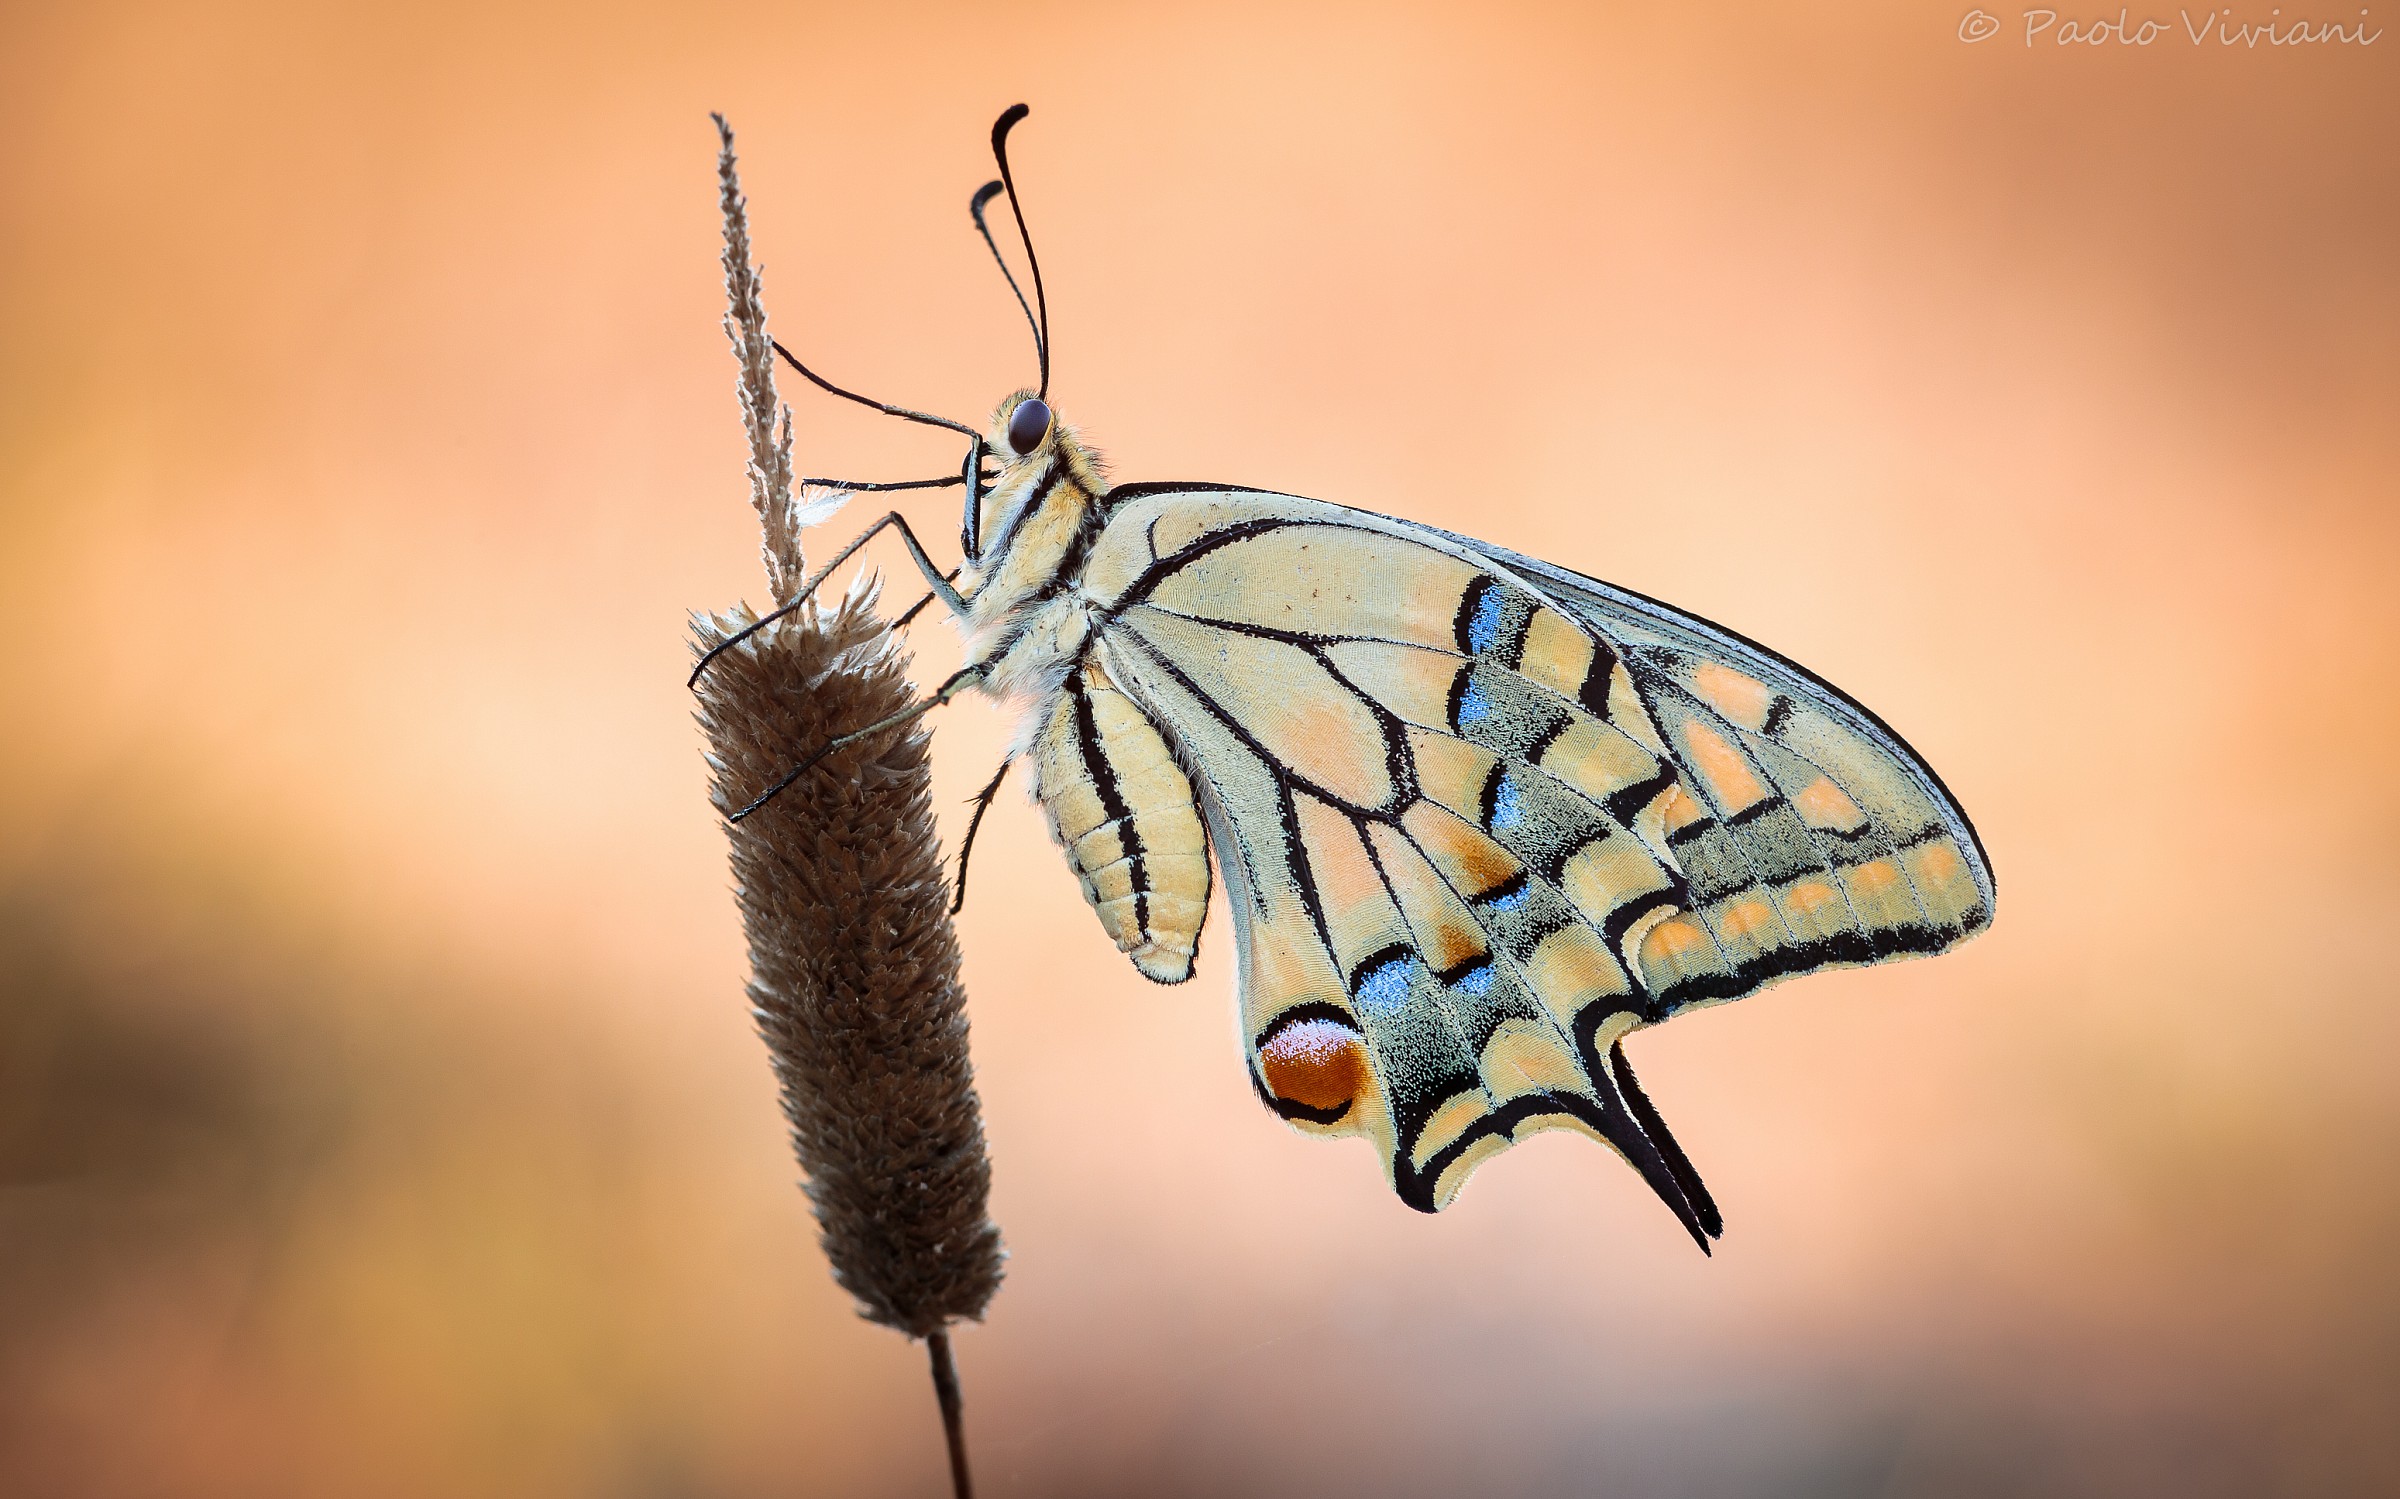 Yet he, the Machaon ... although a bit discolored...